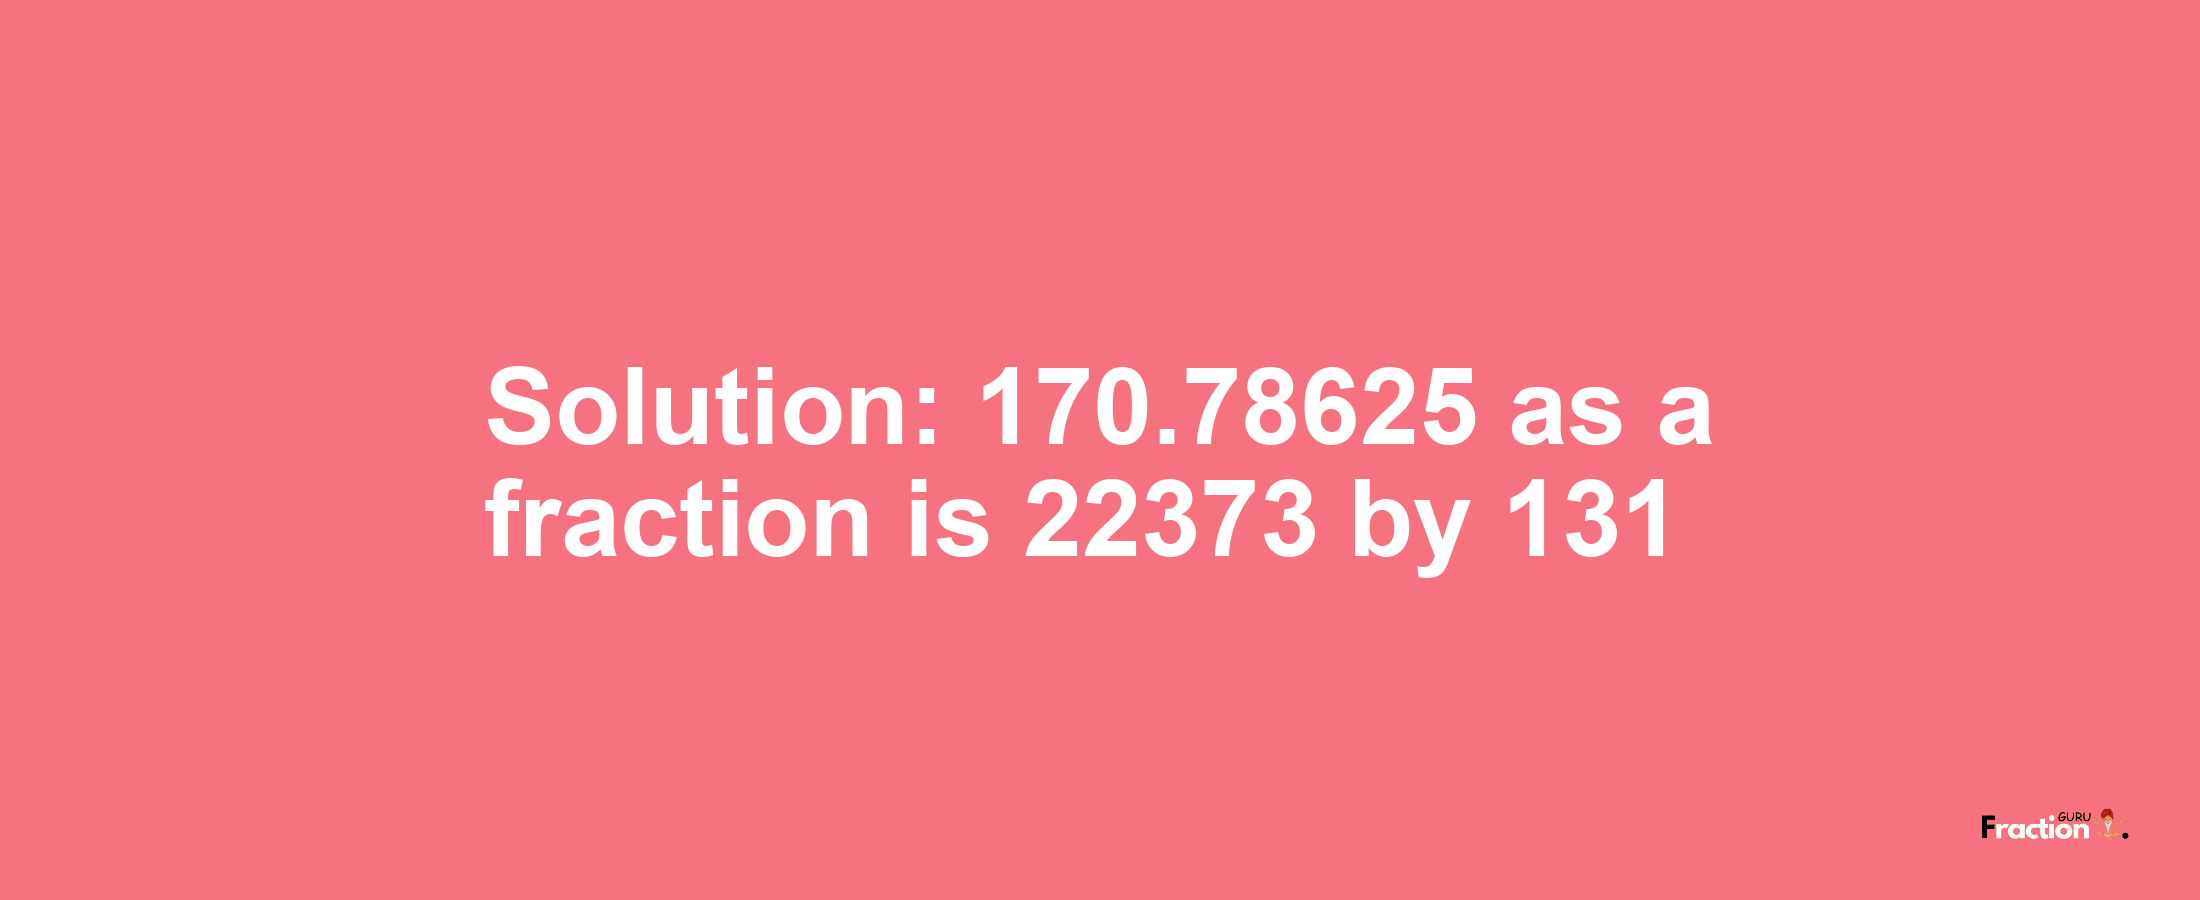 Solution:170.78625 as a fraction is 22373/131